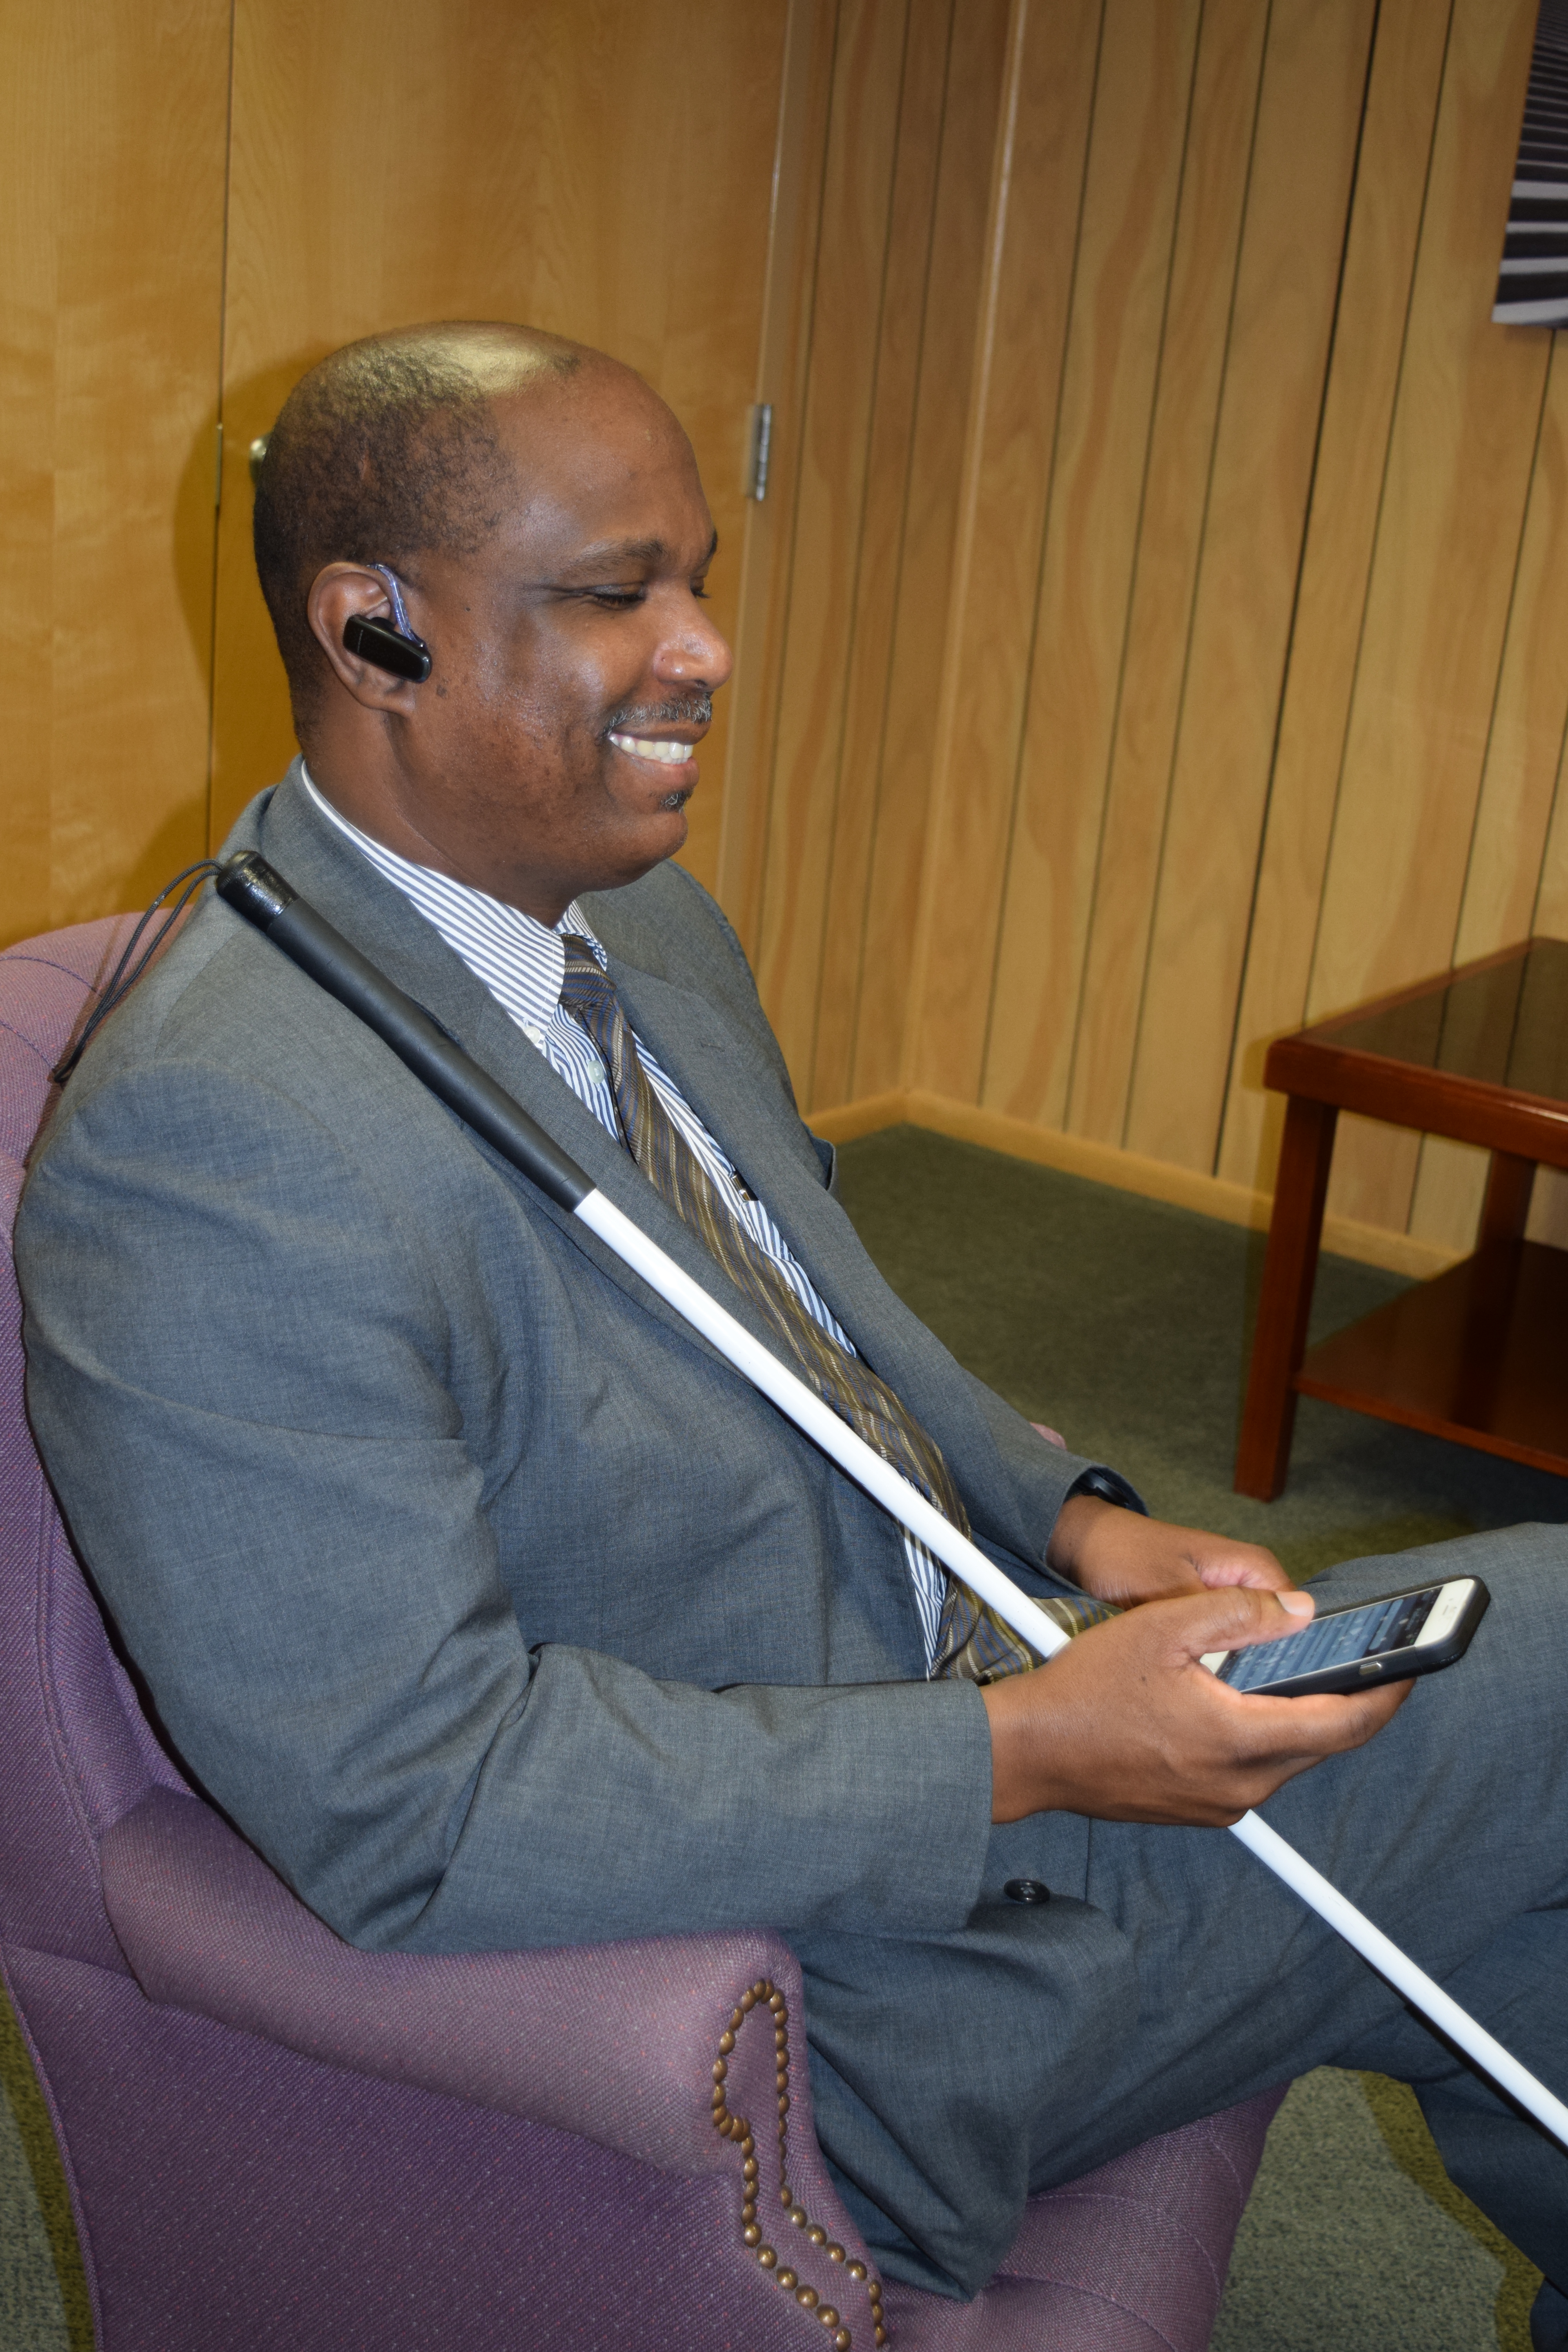 Anil Lewis using an iPhone with Bluetooth earpiece while sitting in a chair.